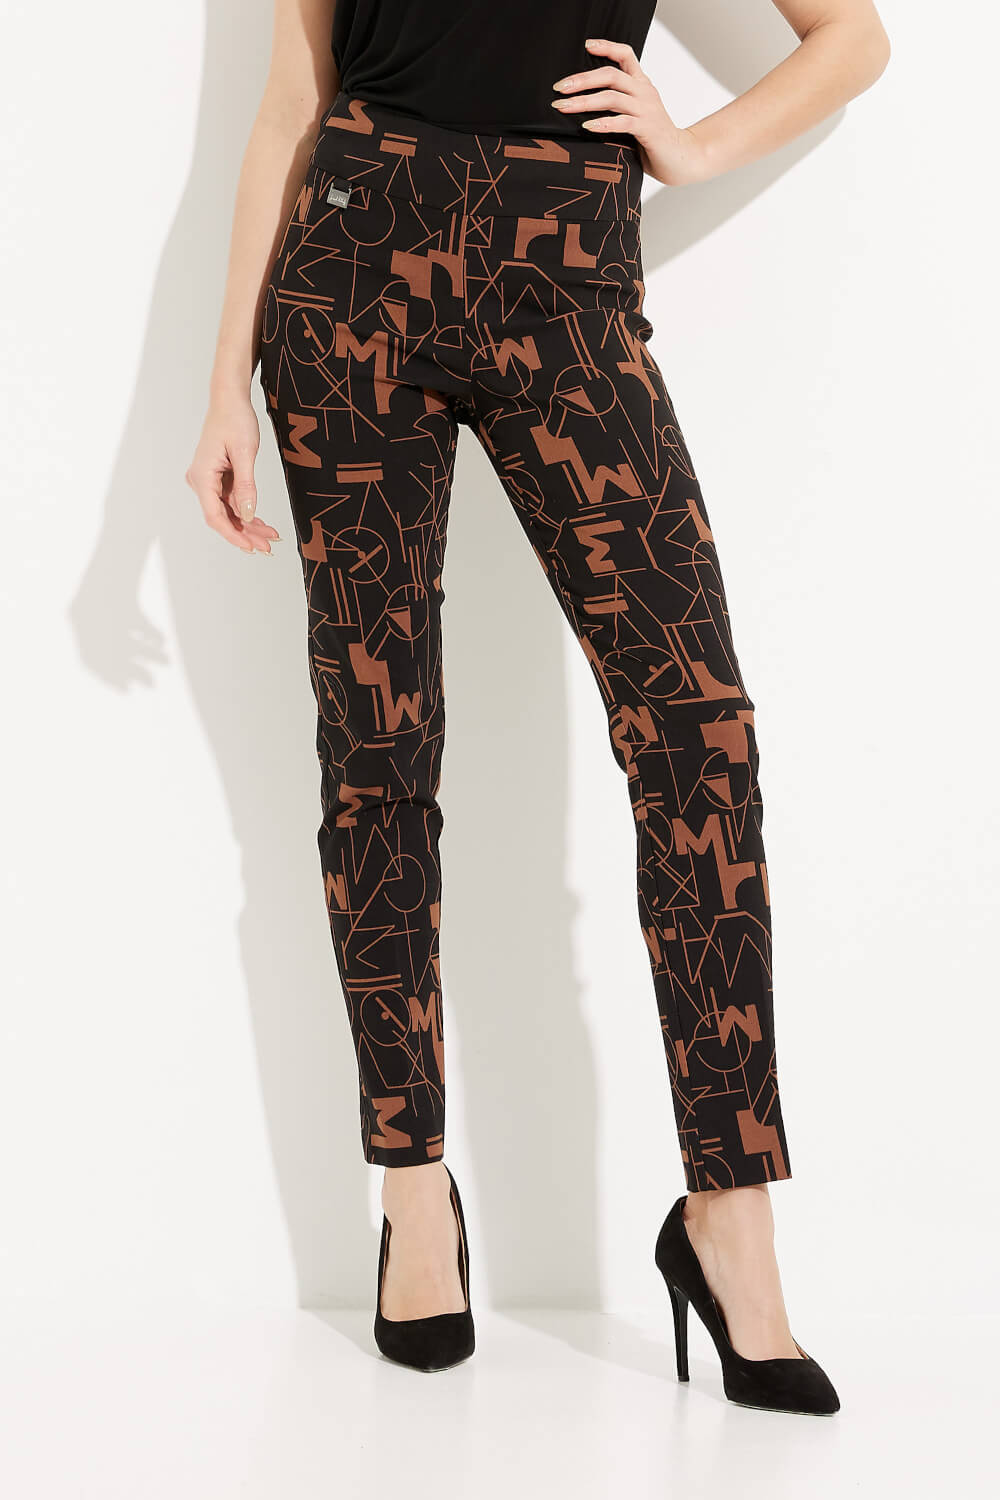 Abstract Print Straight Leg Pants Style 233279. Black/toffee